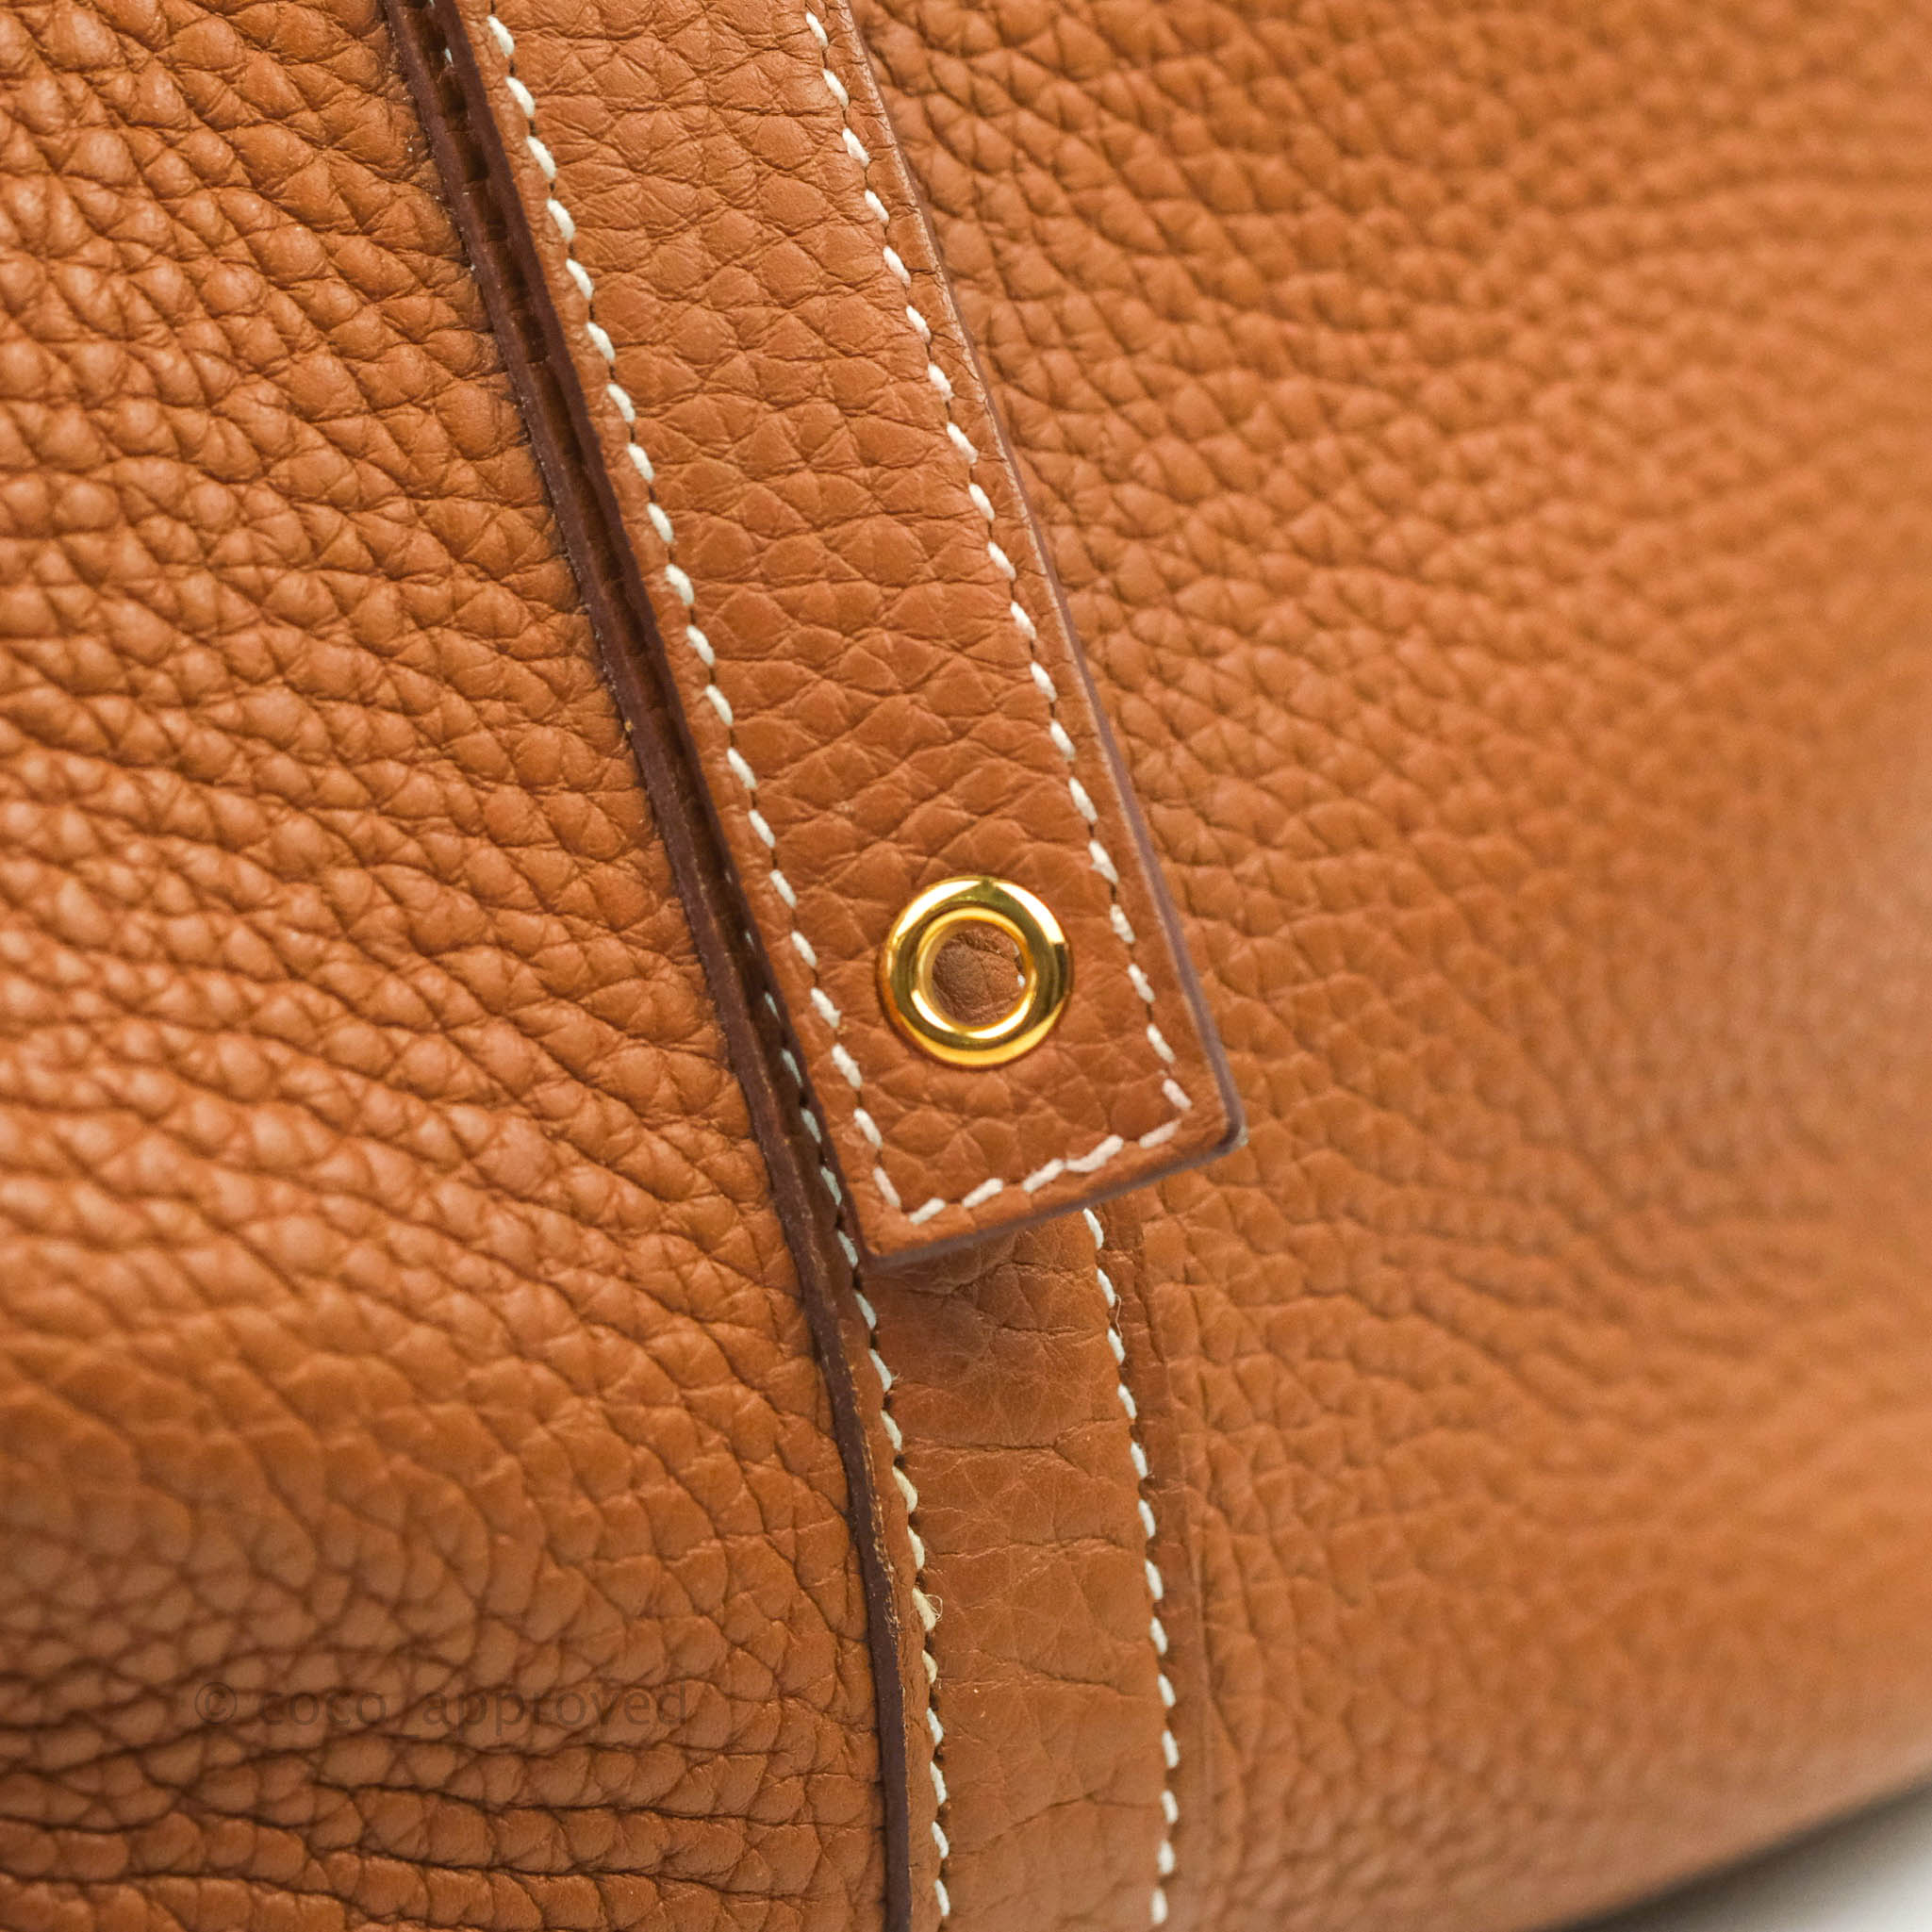 Hermes　Picotin Lock bag PM　Vert criquet　Maurice leather　Gold hardware